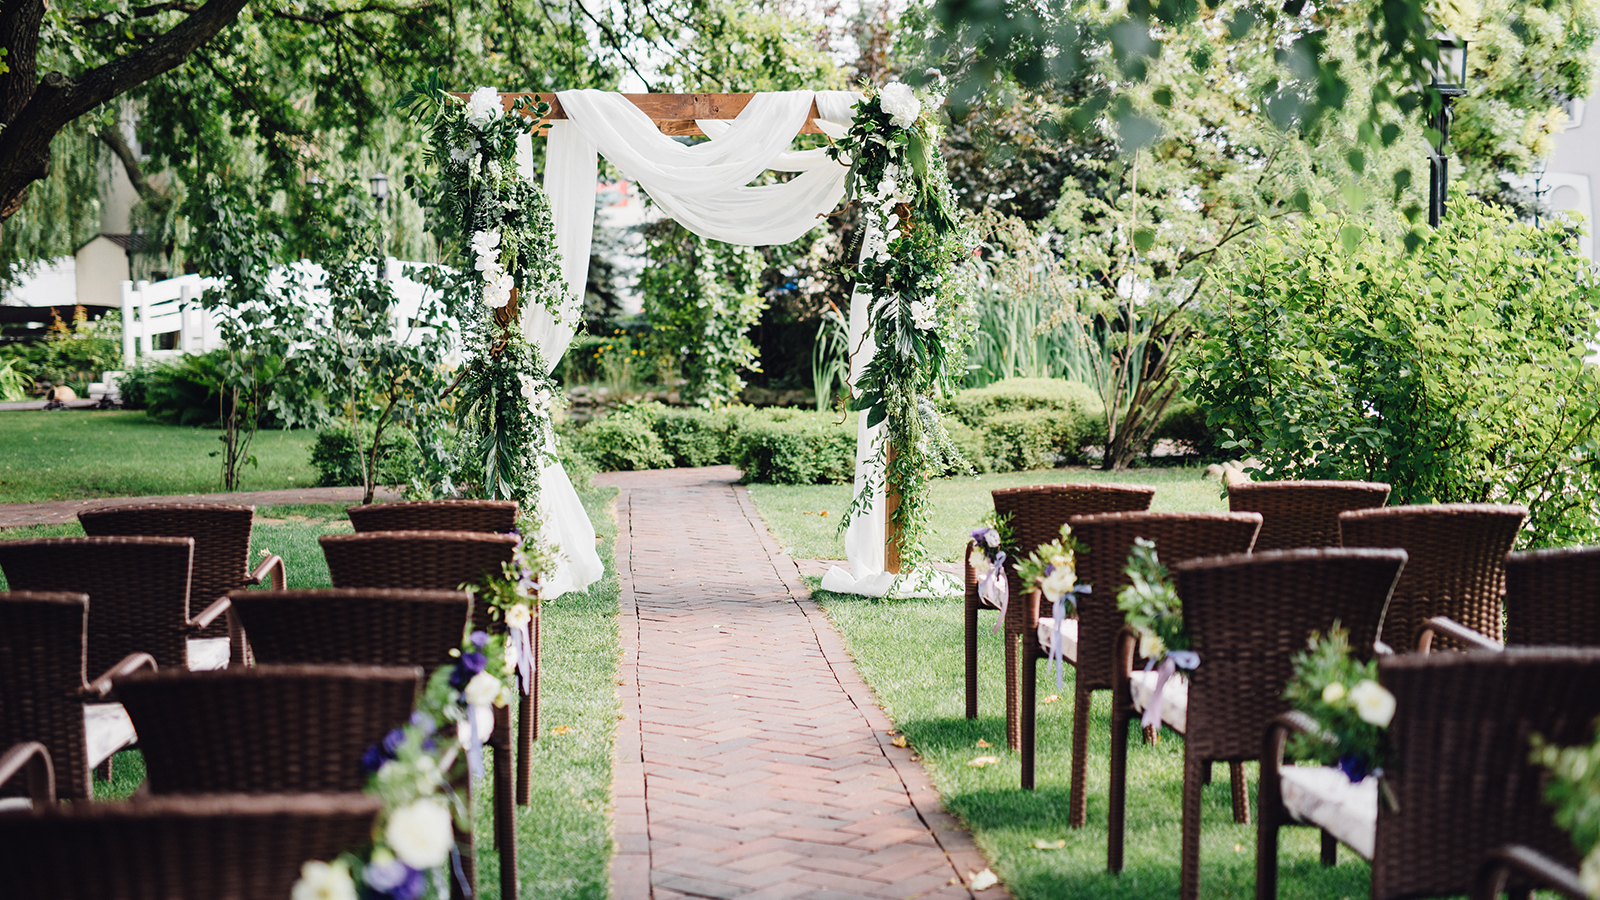 Wooden wedding arch decorated by white cloth and flowers with greenery standing in the center of wedding ceremony. Brown chairs on side.